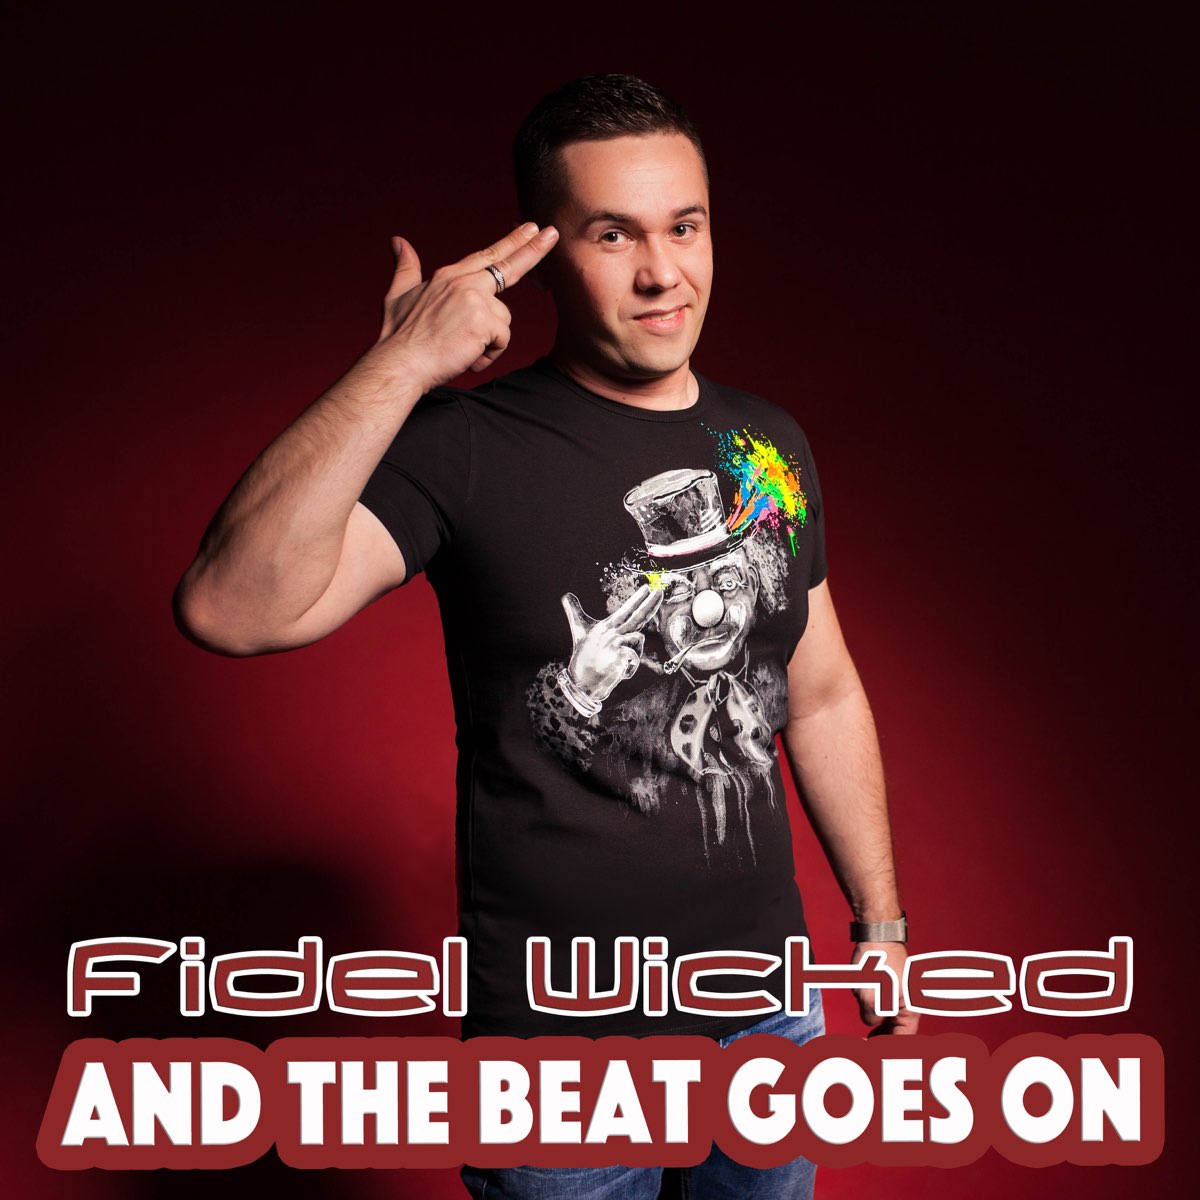 And the beat goes on. Fidel Wicked фото. DJ Fidel Wicked. DJ Fidel Wicked концерт.